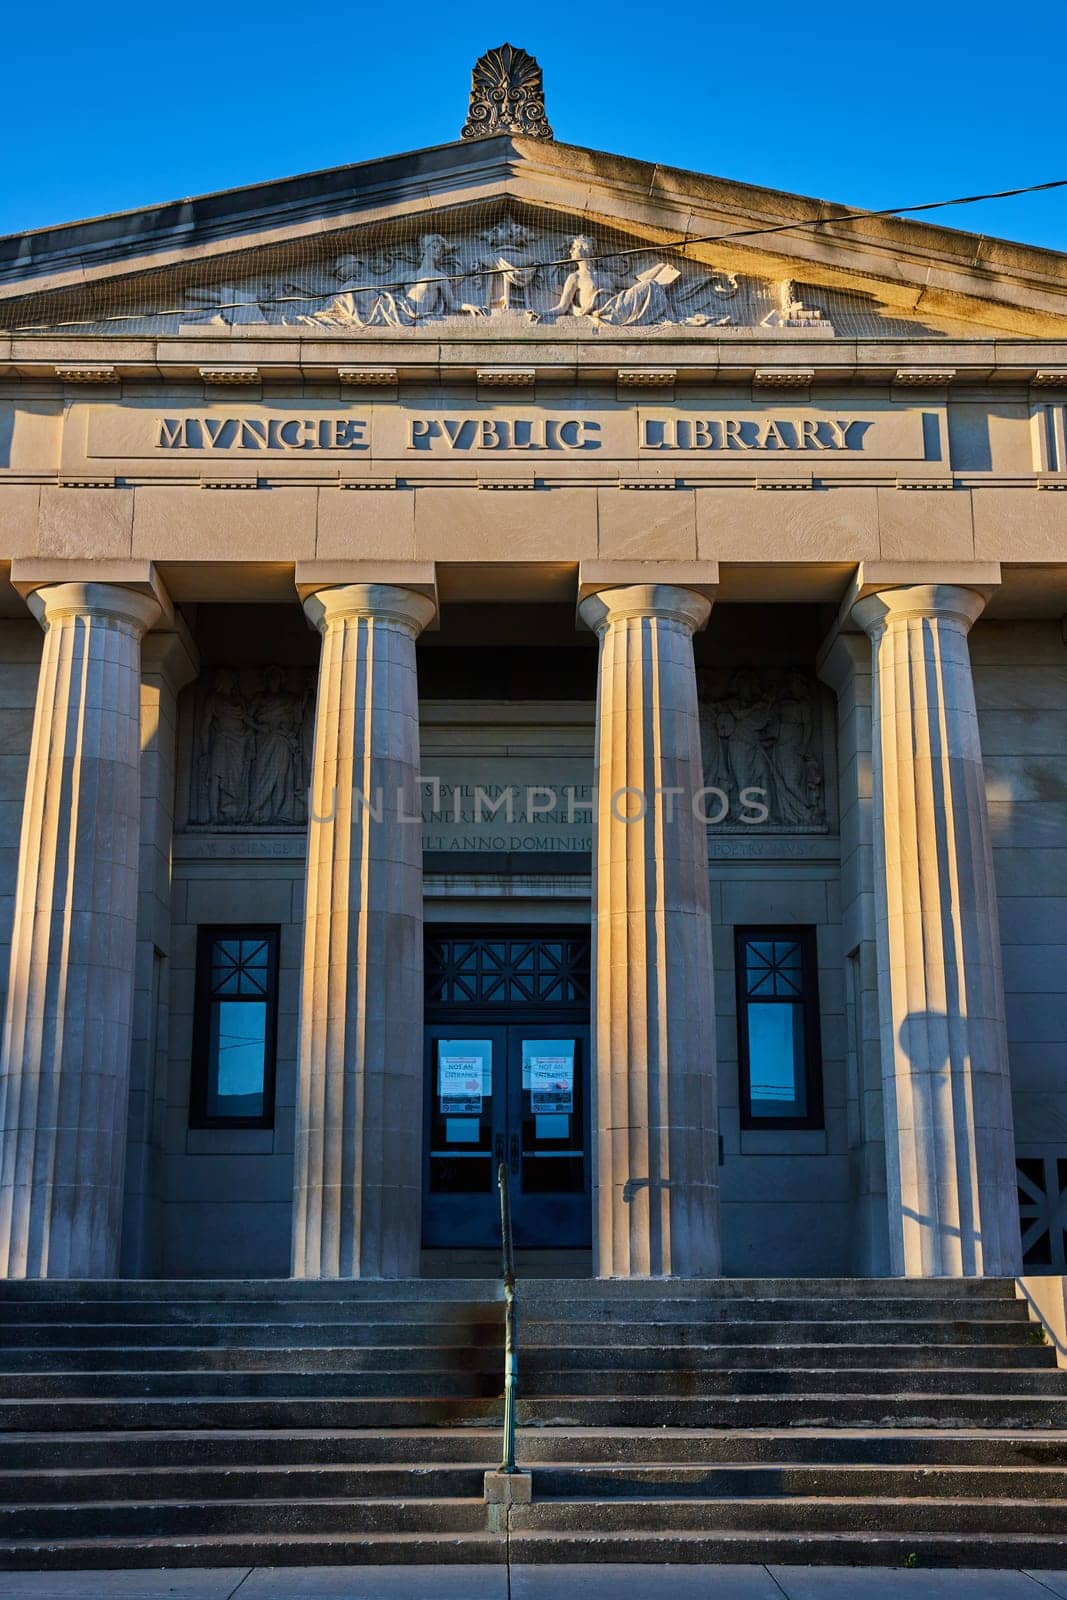 Golden Hour at Muncie Public Library with Classical Columns by njproductions